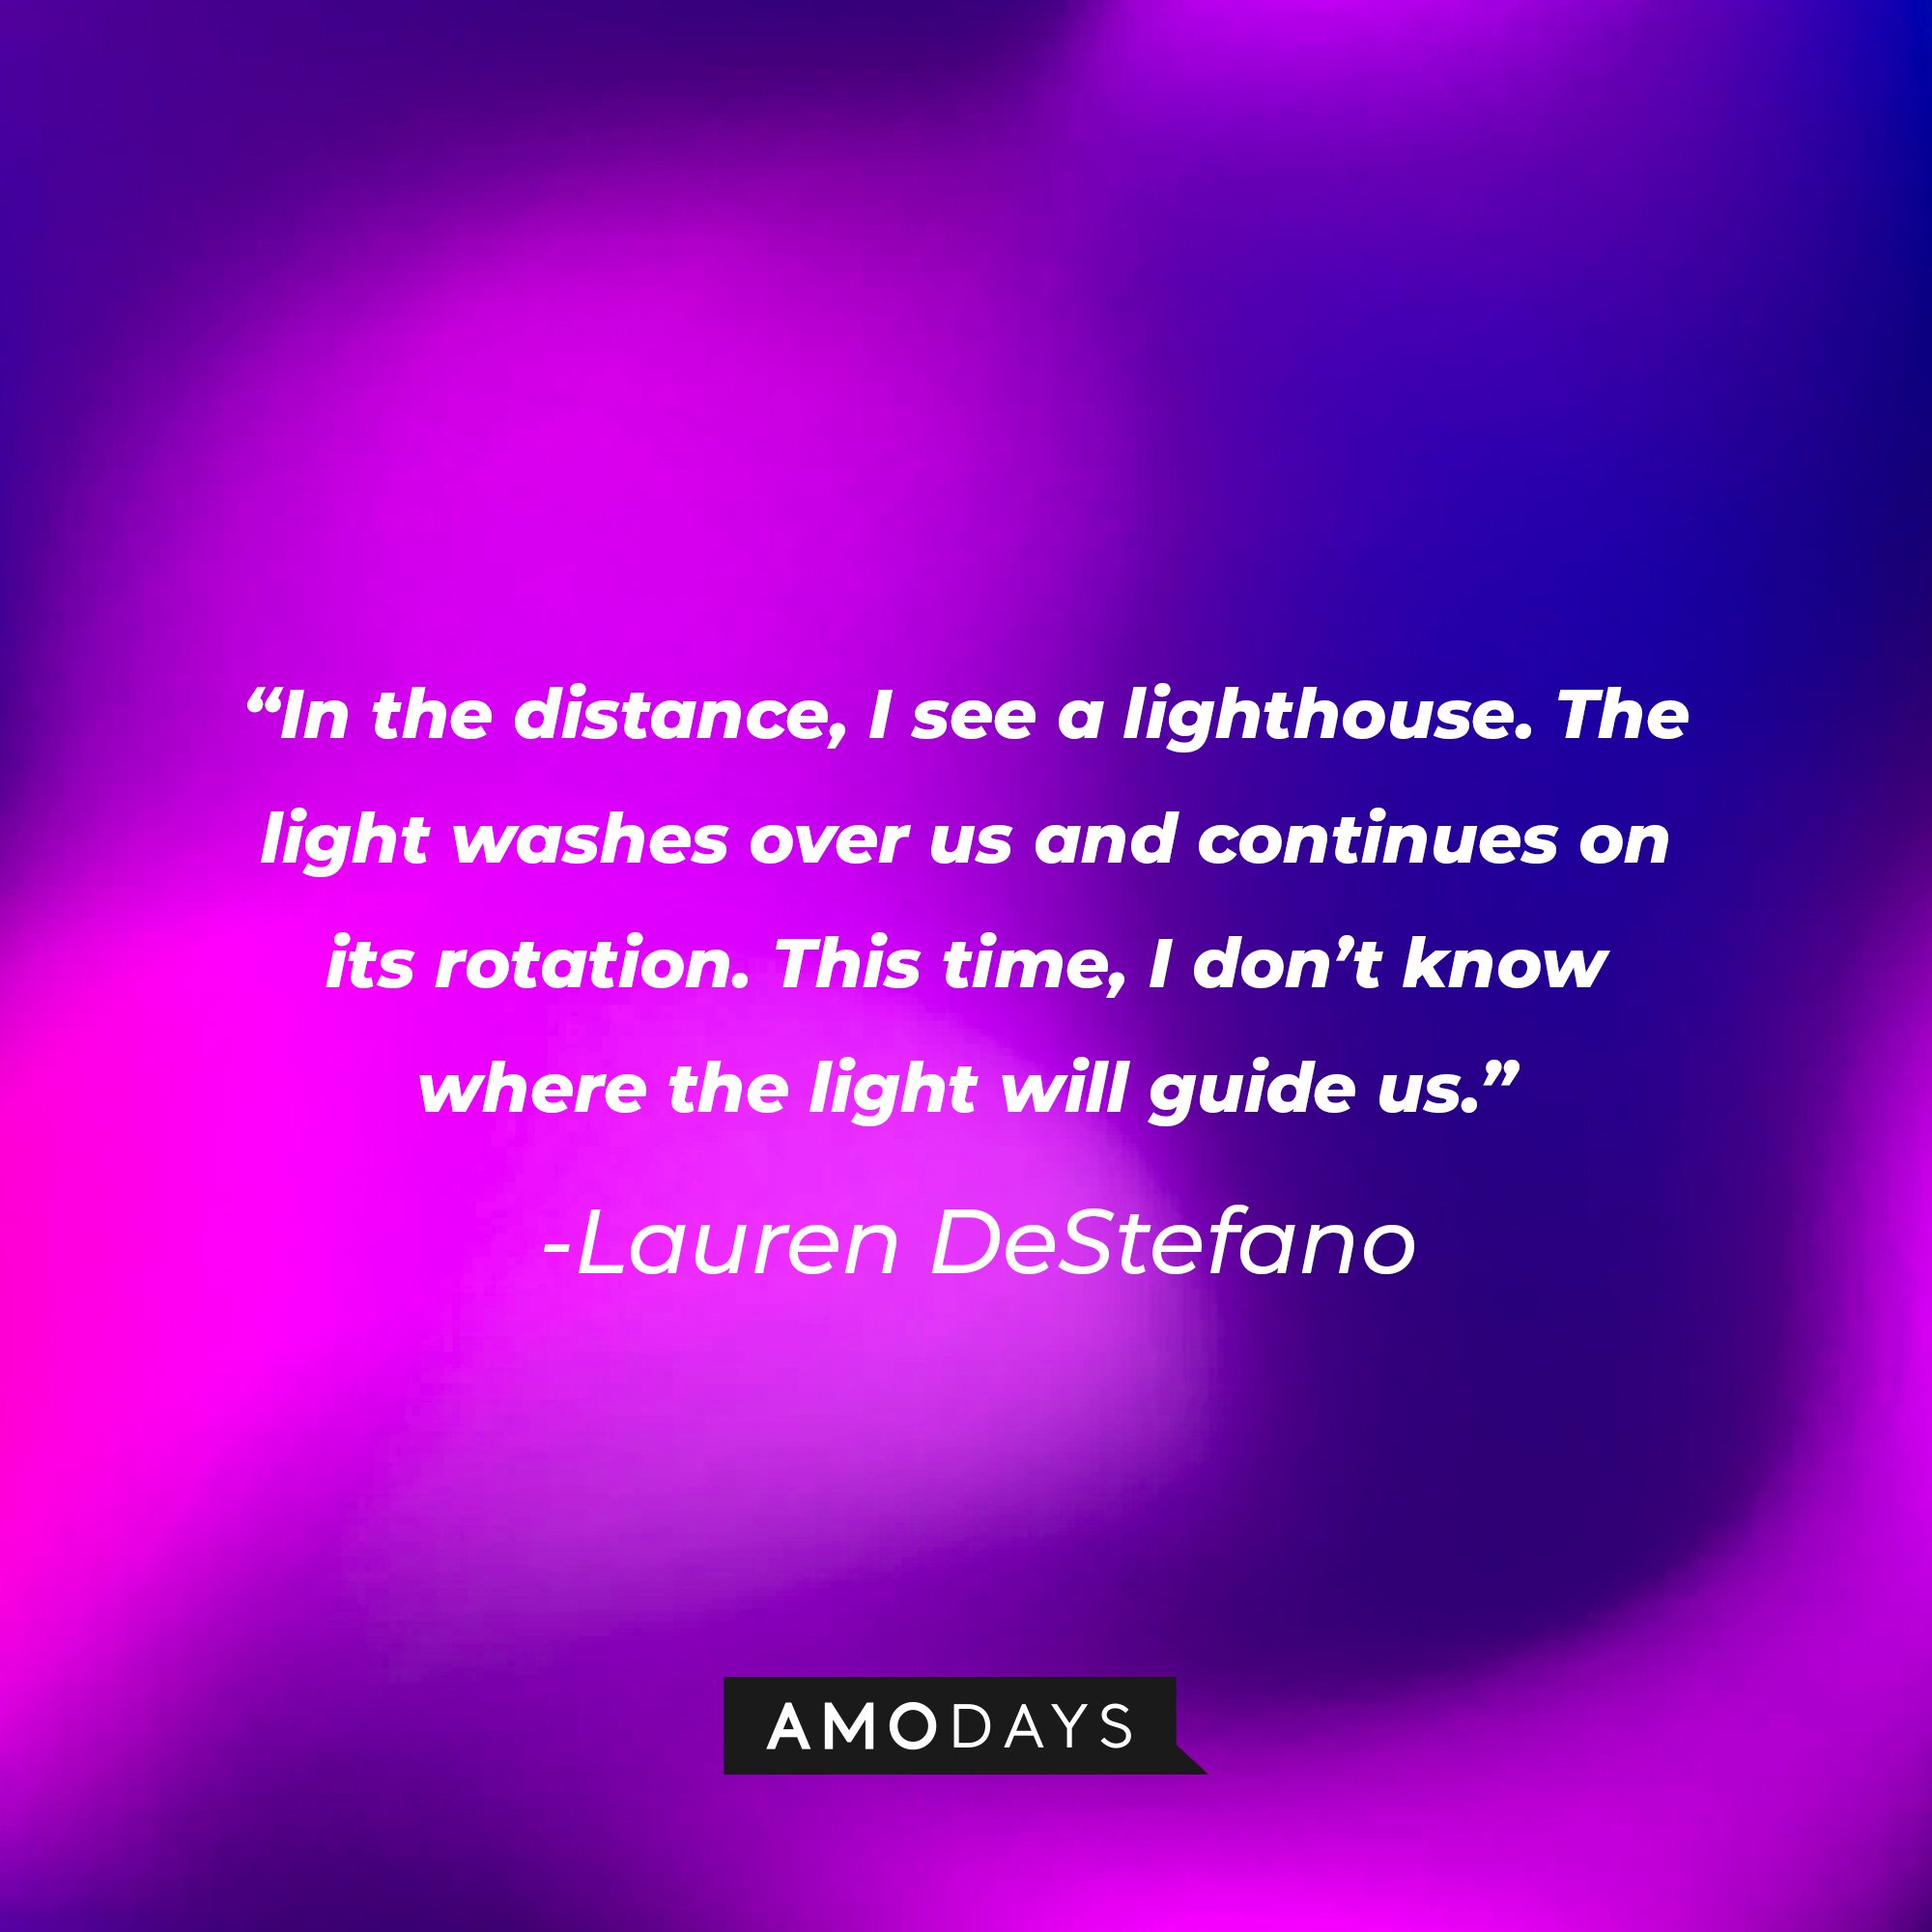 Lauren DeStefano’s quote: “In the distance, I see a lighthouse. The light washes over us and continues on its rotation. This time, I don’t know where the light will guide us.” | Image: AmoDays